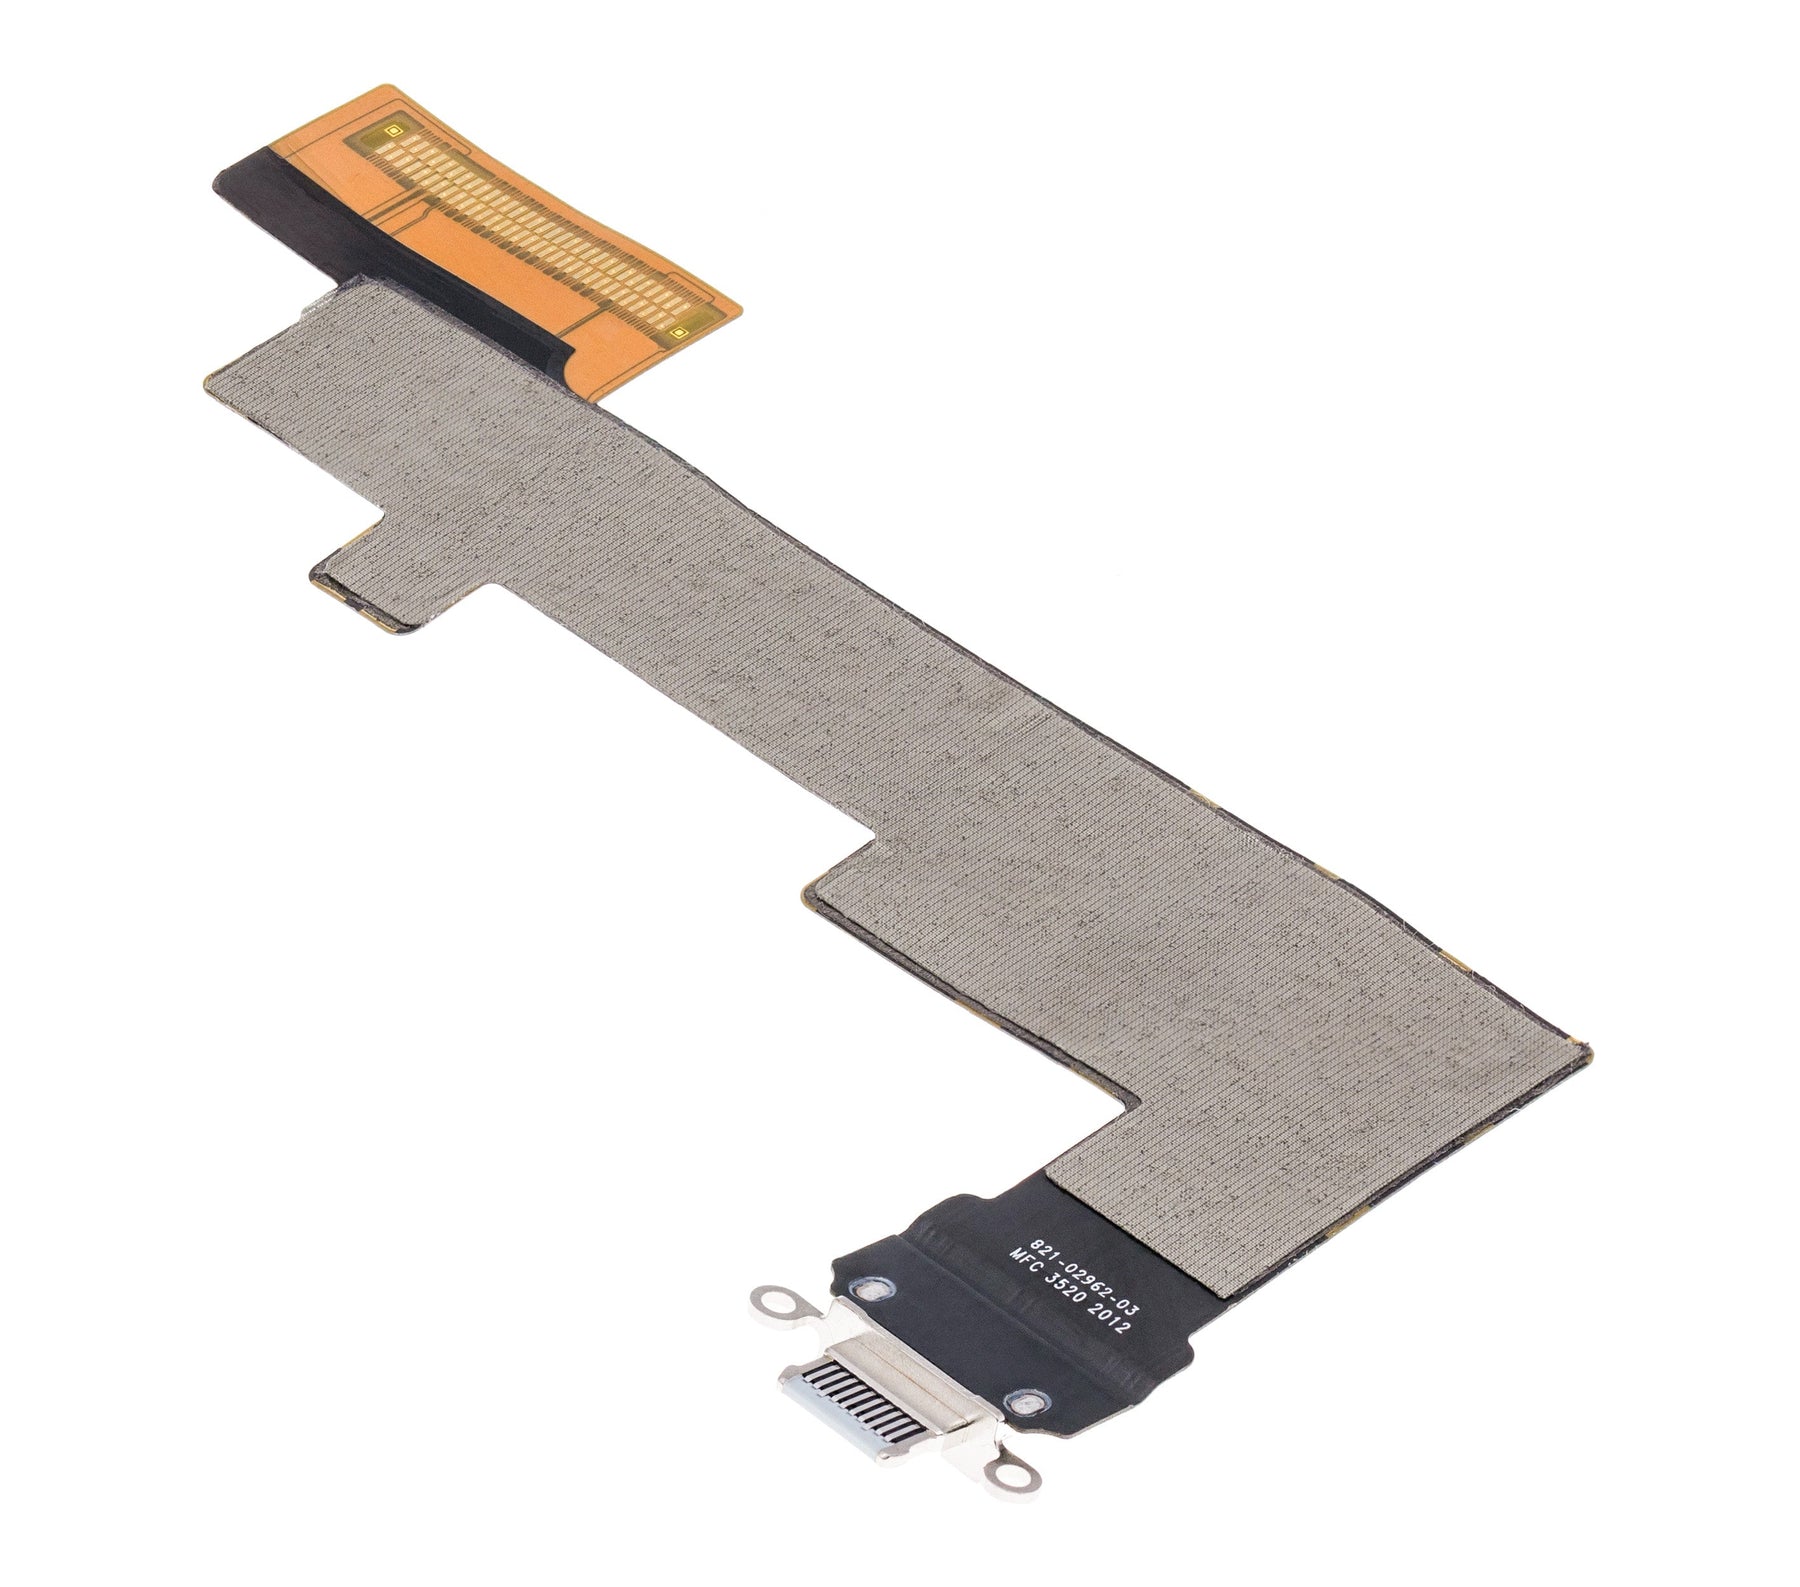 CHARGING PORT FLEX CABLE (4G VERSION) COMPATIBLE FOR IPAD AIR 4 - SKY BLUE